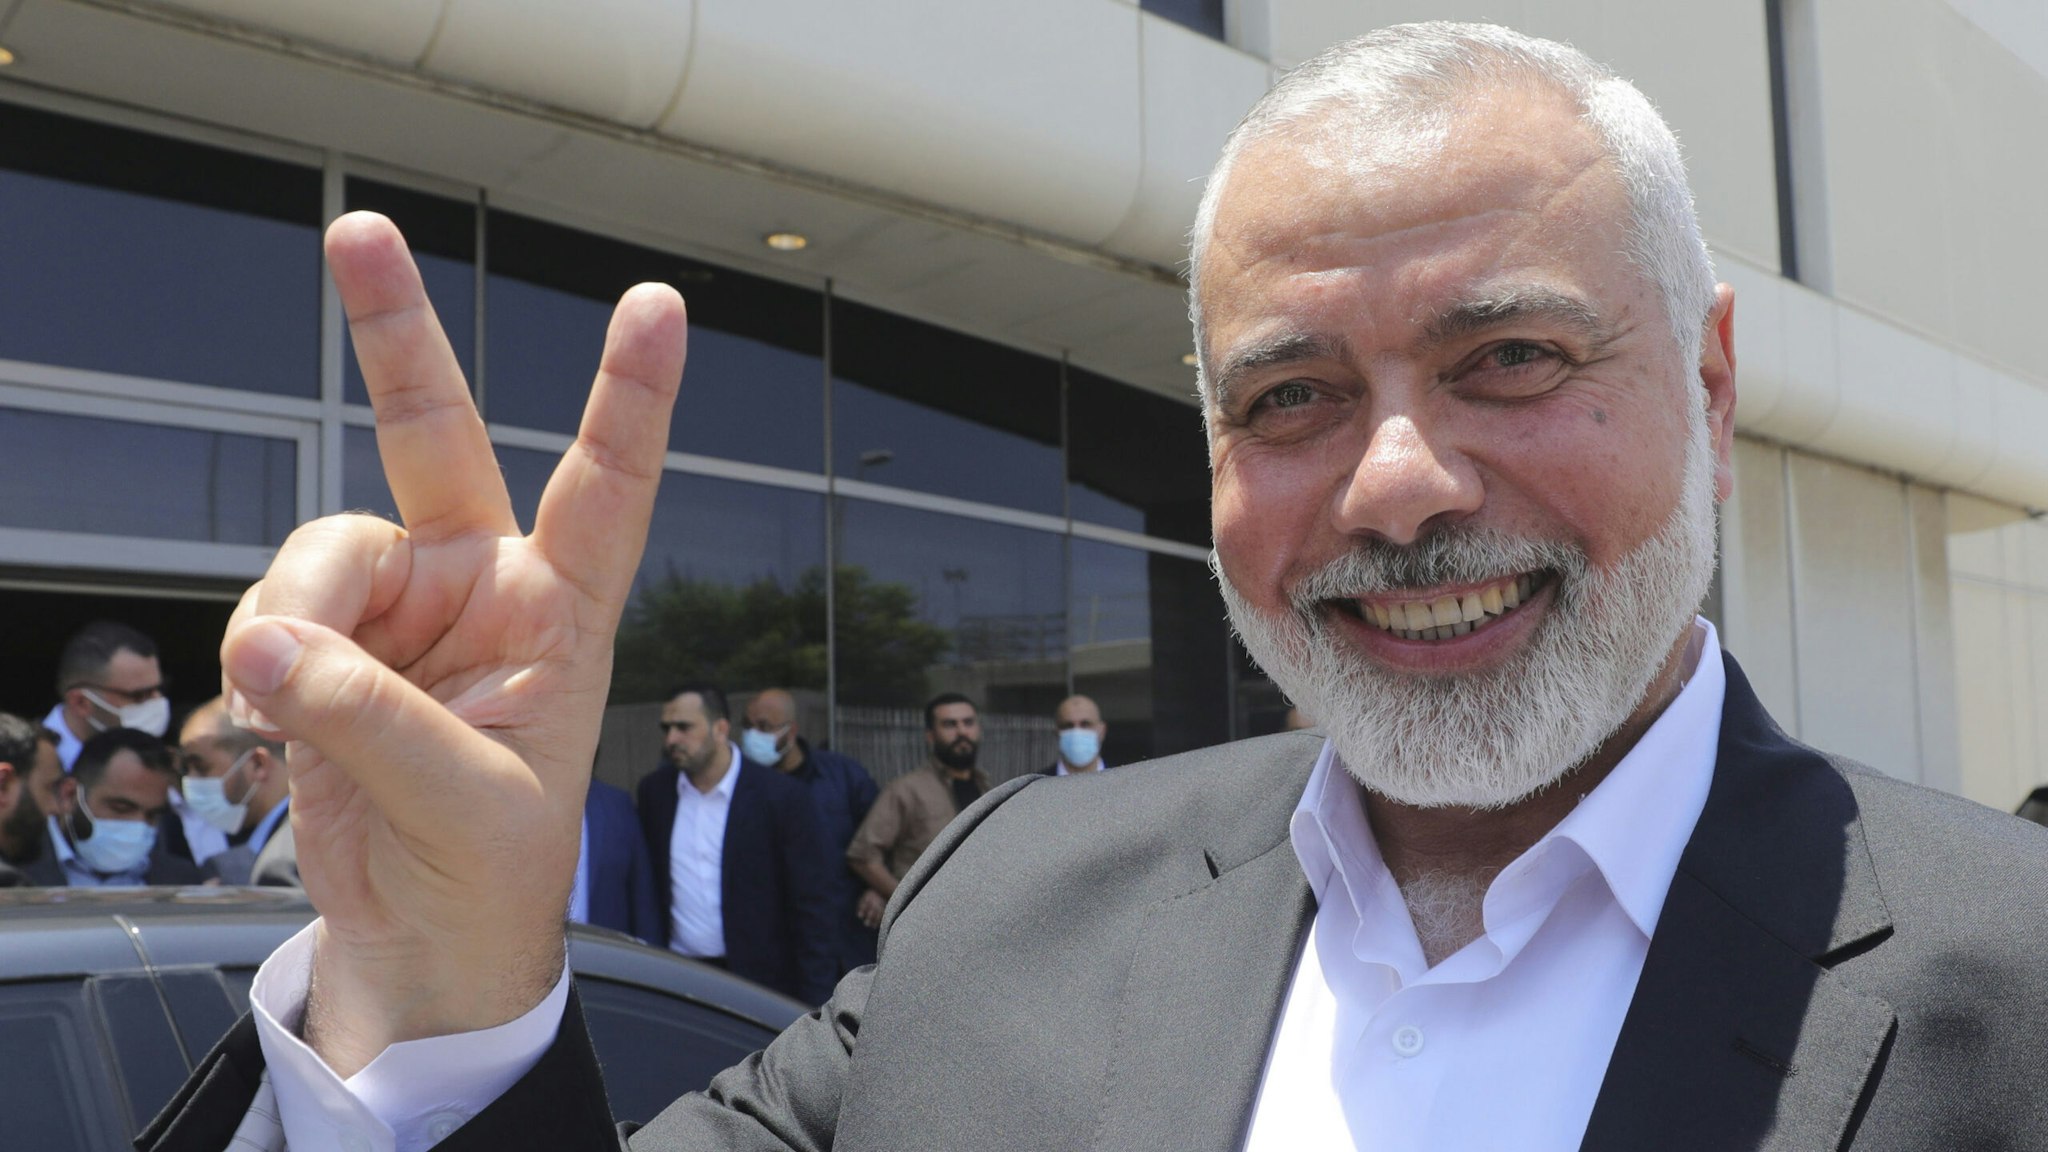 BEIRUT, LEBANON - JUNE 27: Ismail Haniya arrives at Beirut-Rafic Hariri International Airport on June 27, 2021 in Beirut, Lebanon. Haniya, leader of the Palestinian militant group, Hamas is scheduled to meet top officials and discuss the conditions of Palestinian refugees in Lebanon.